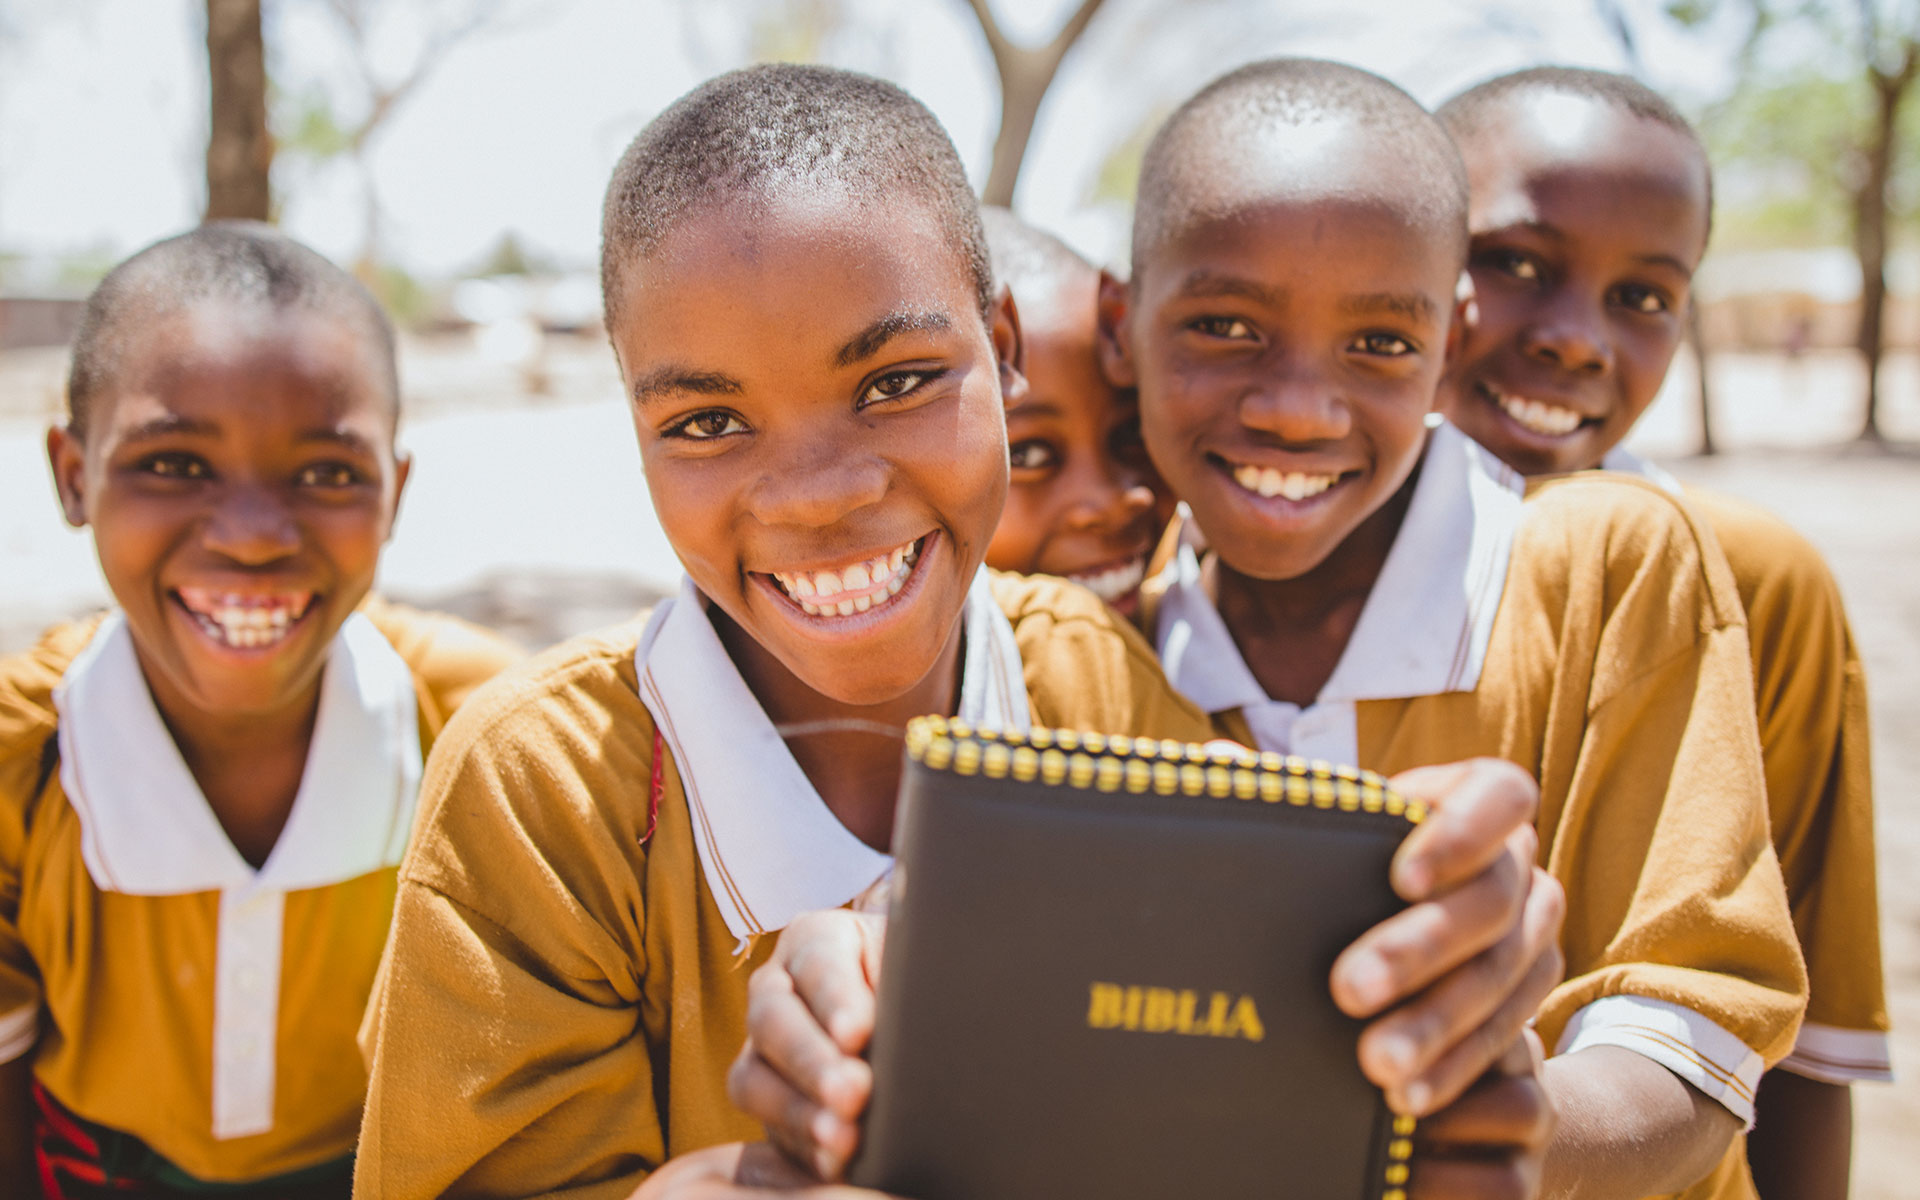 Kids smile holding a Bible